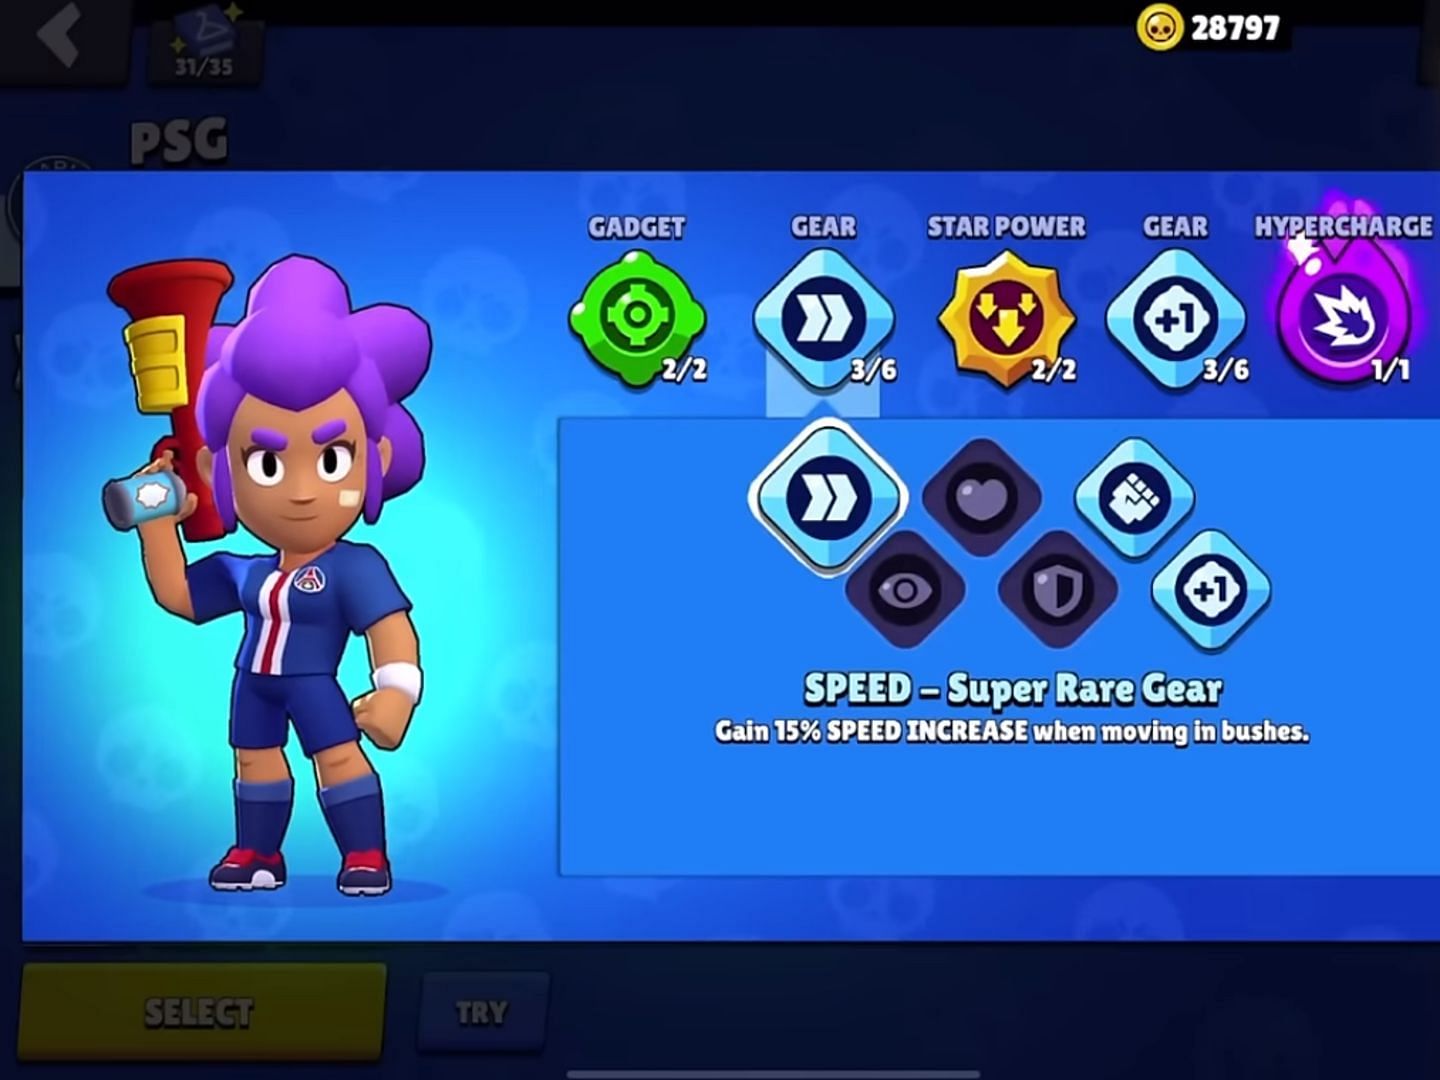 Speed - Super Rare Gear (Image via Supercell)